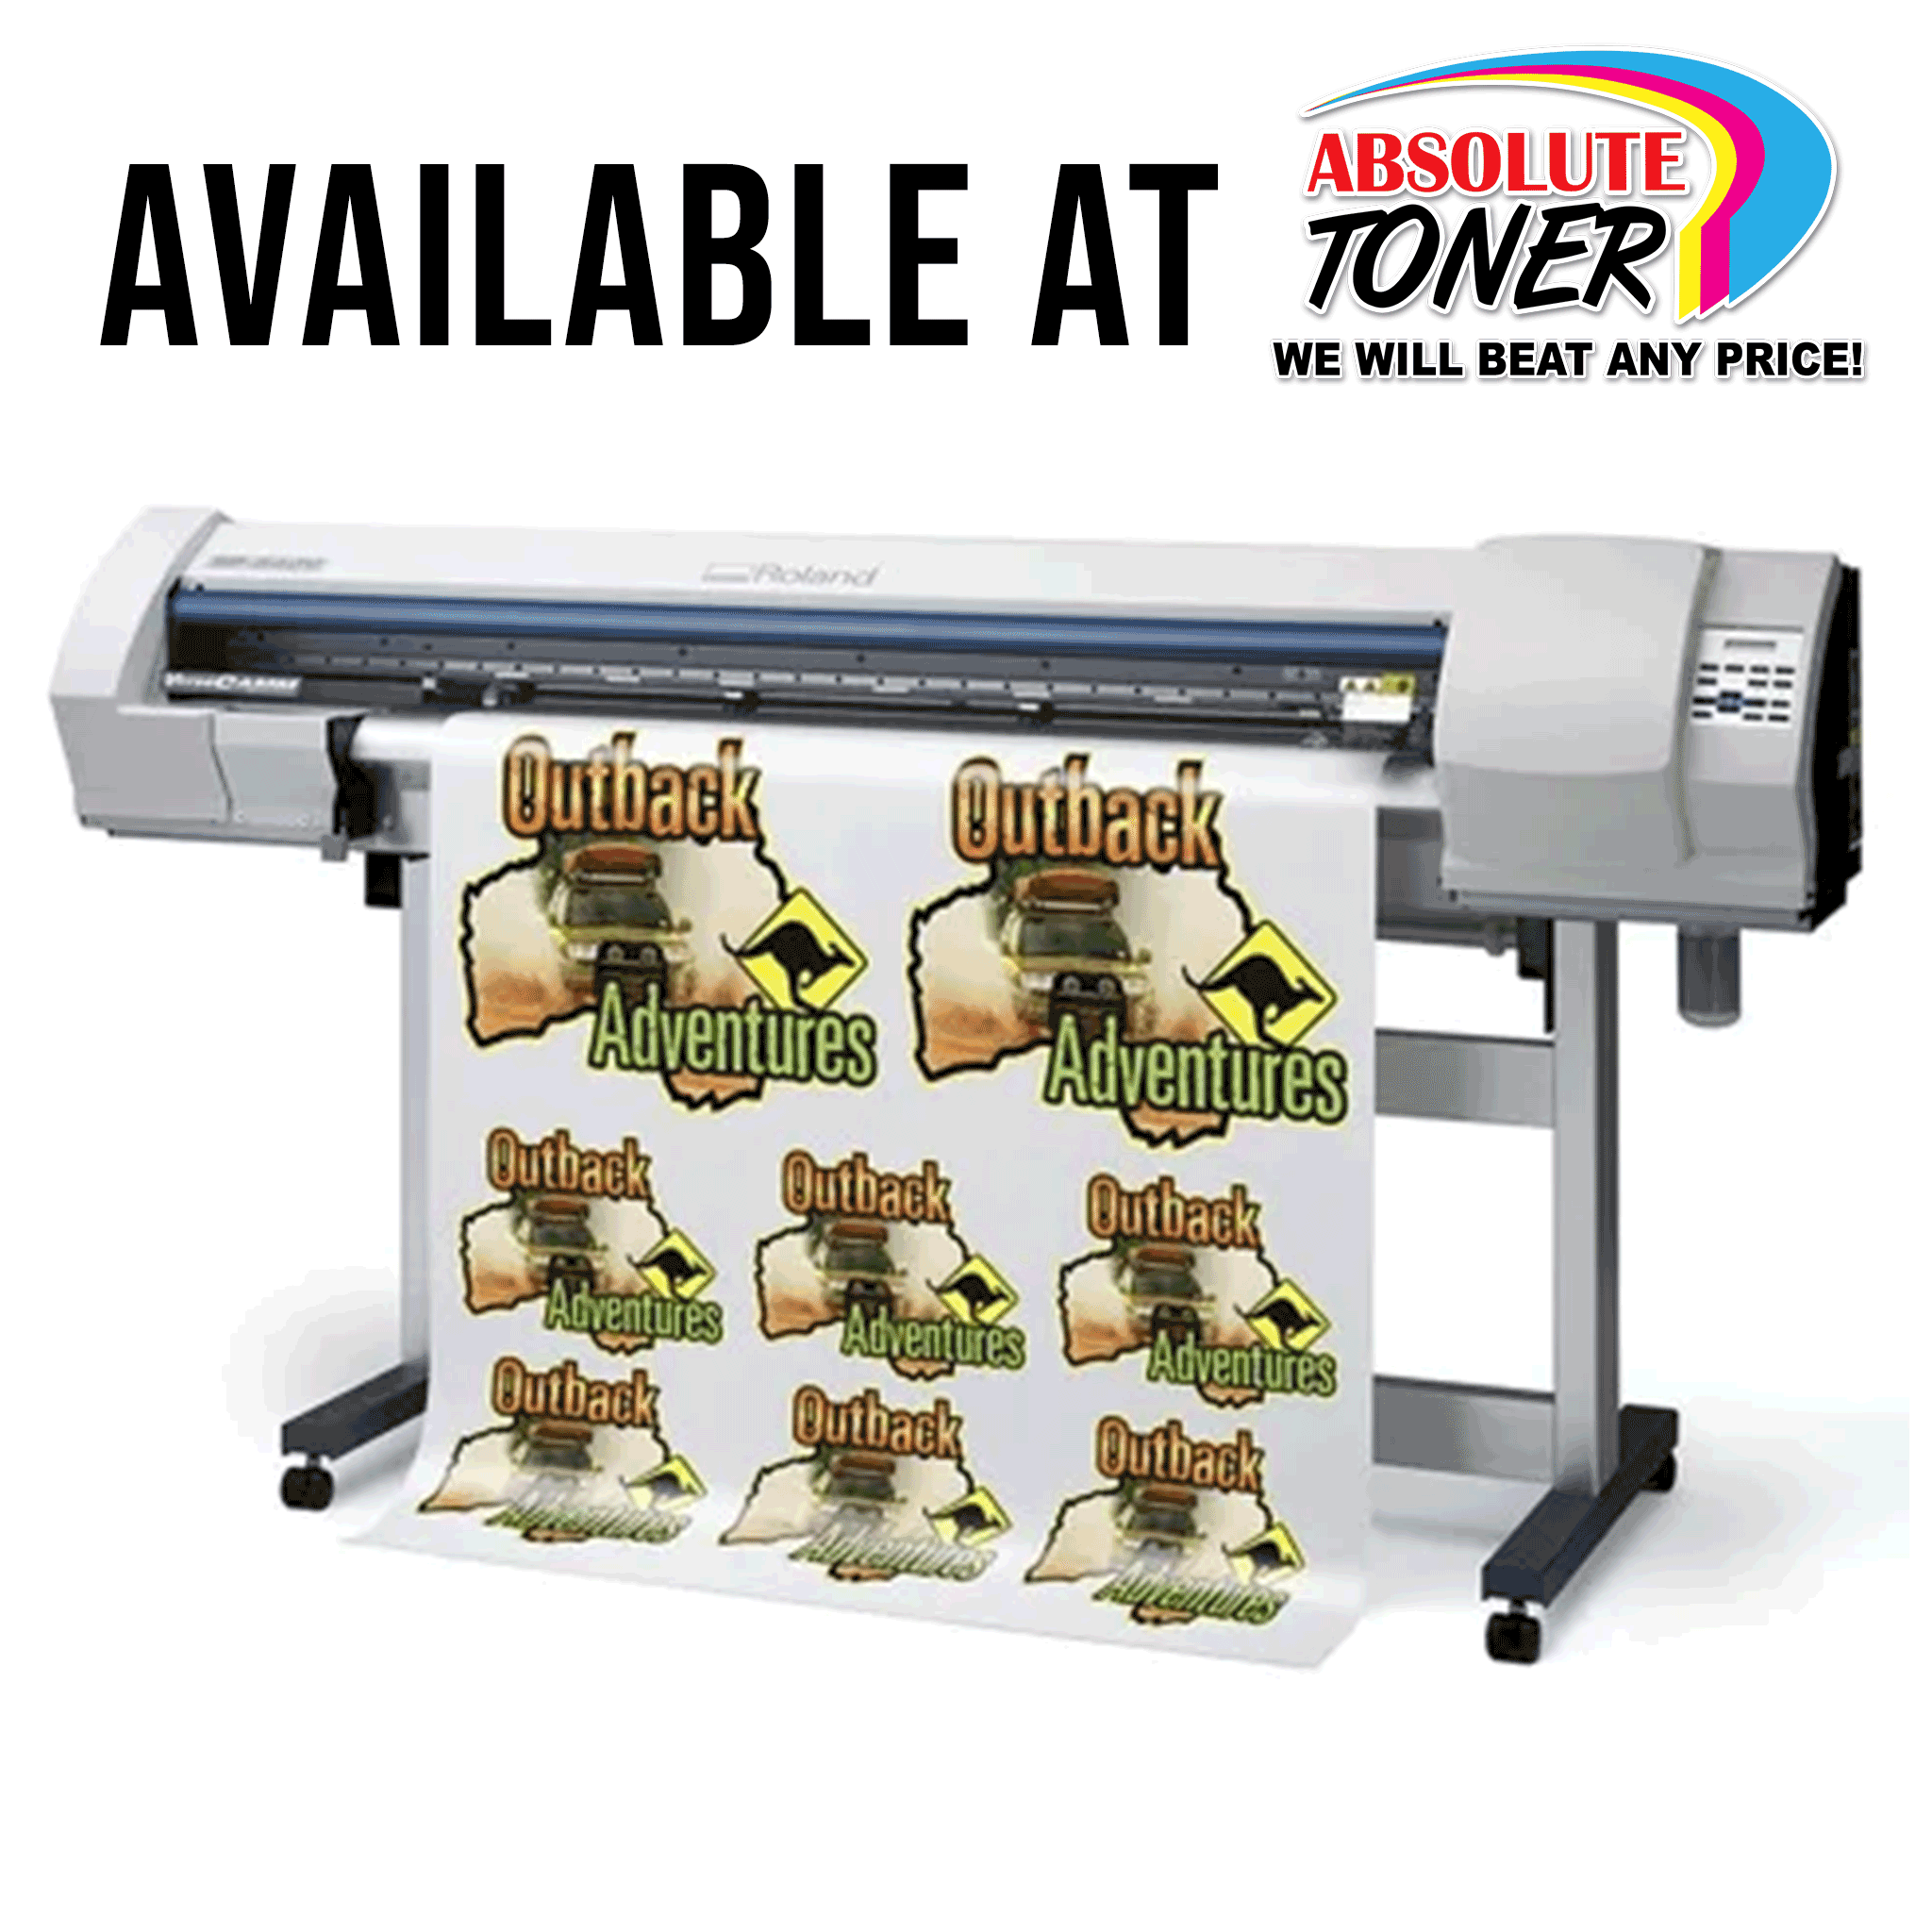 Absolute Toner Roland VersaCAMM SP-540V Wide Format Eco-Solvent Inkjet Commercial Production Printer and Cutter Print and Cut Plotters